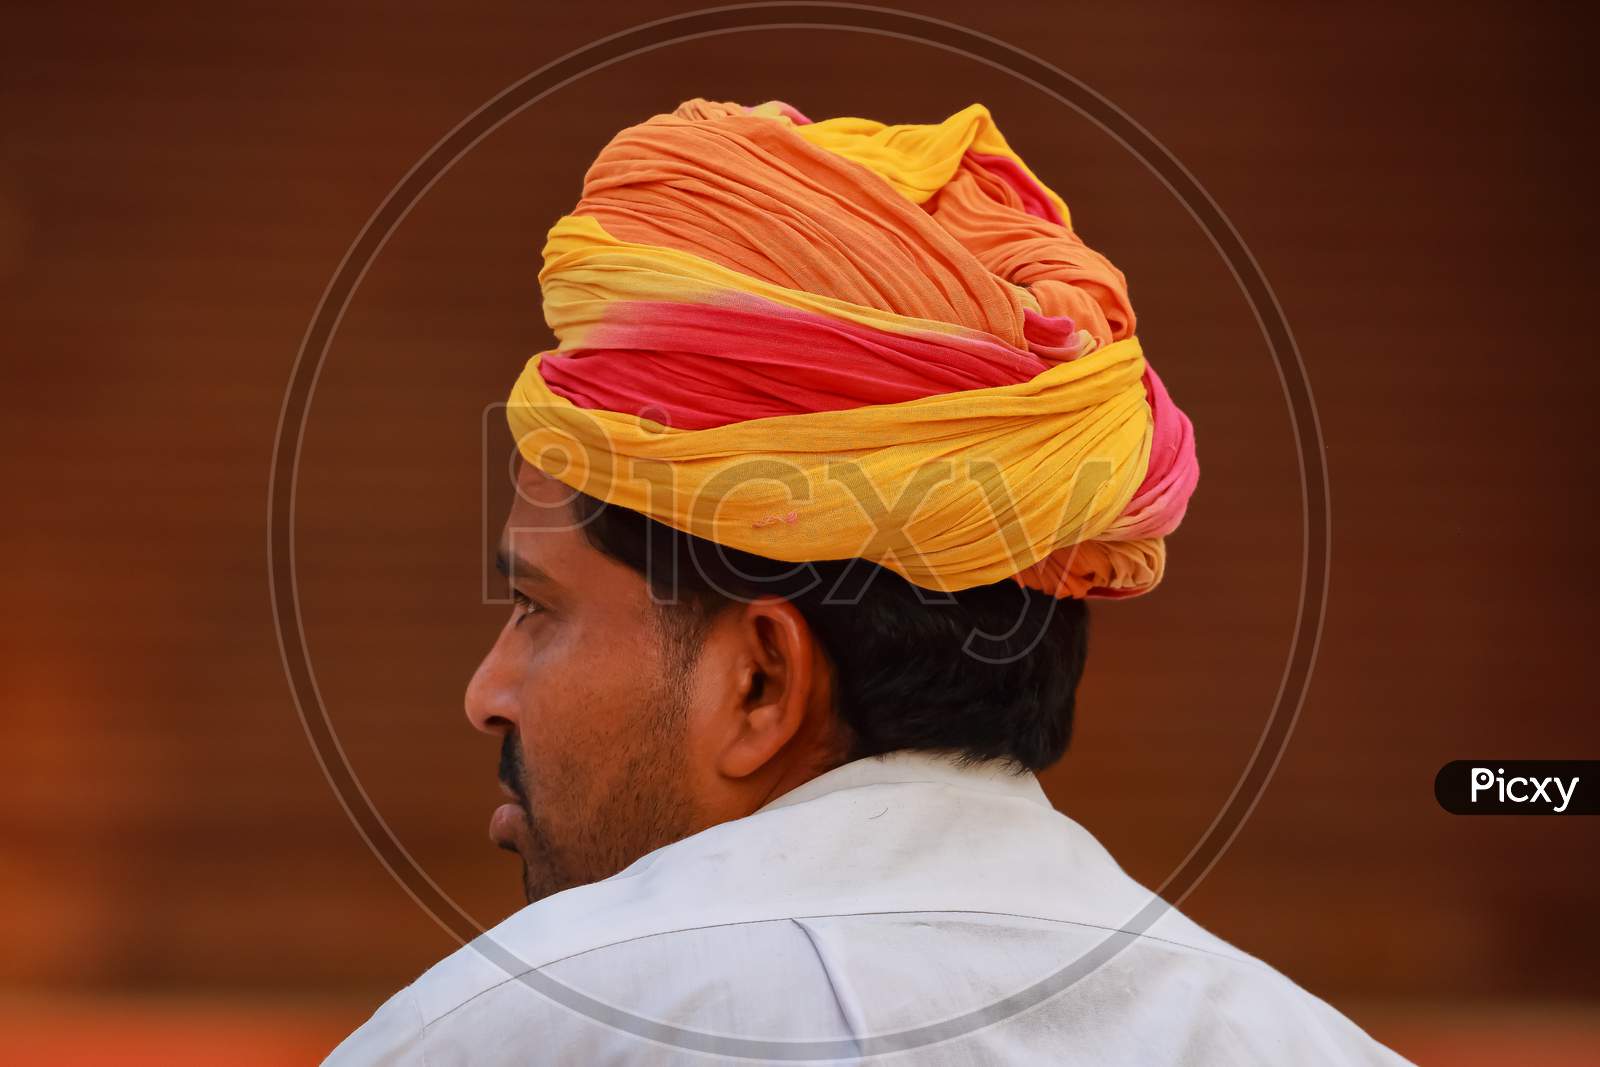 Abstract side portrait of a Rajasthani man wearing a colorful turban